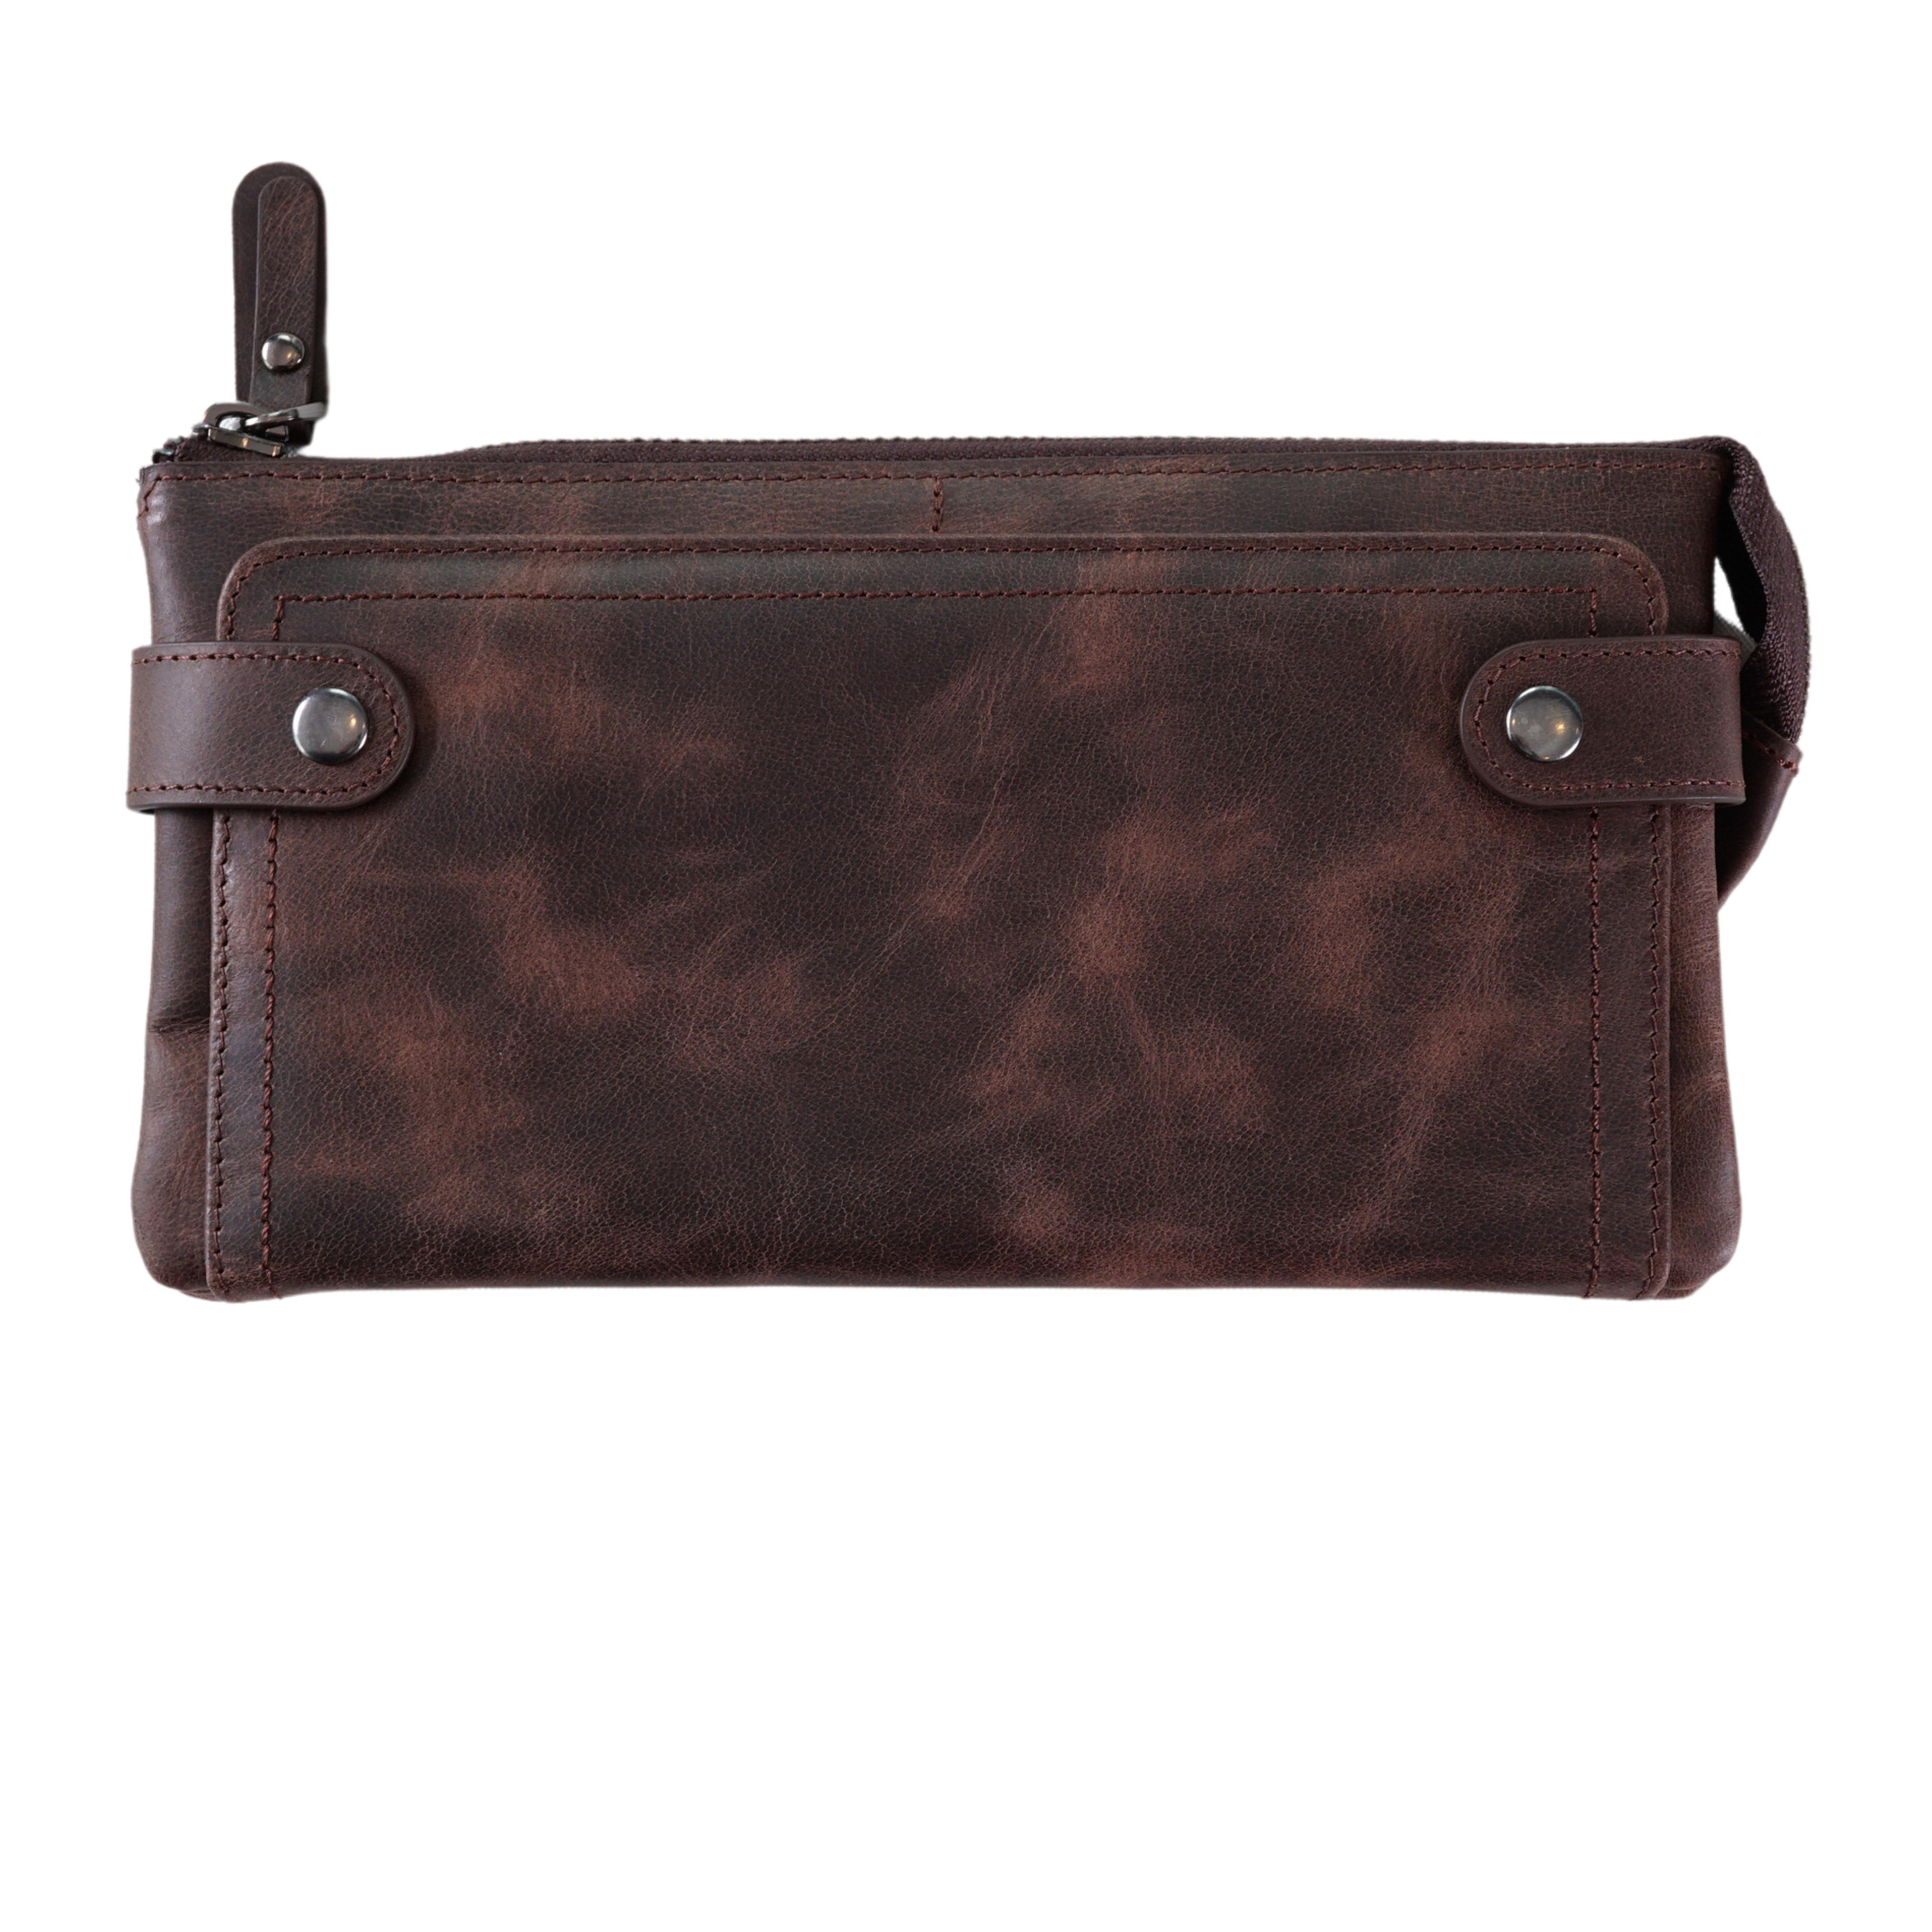 Genuine Leather Phone Compartment Handle Roman Wallet Unisex - Brown